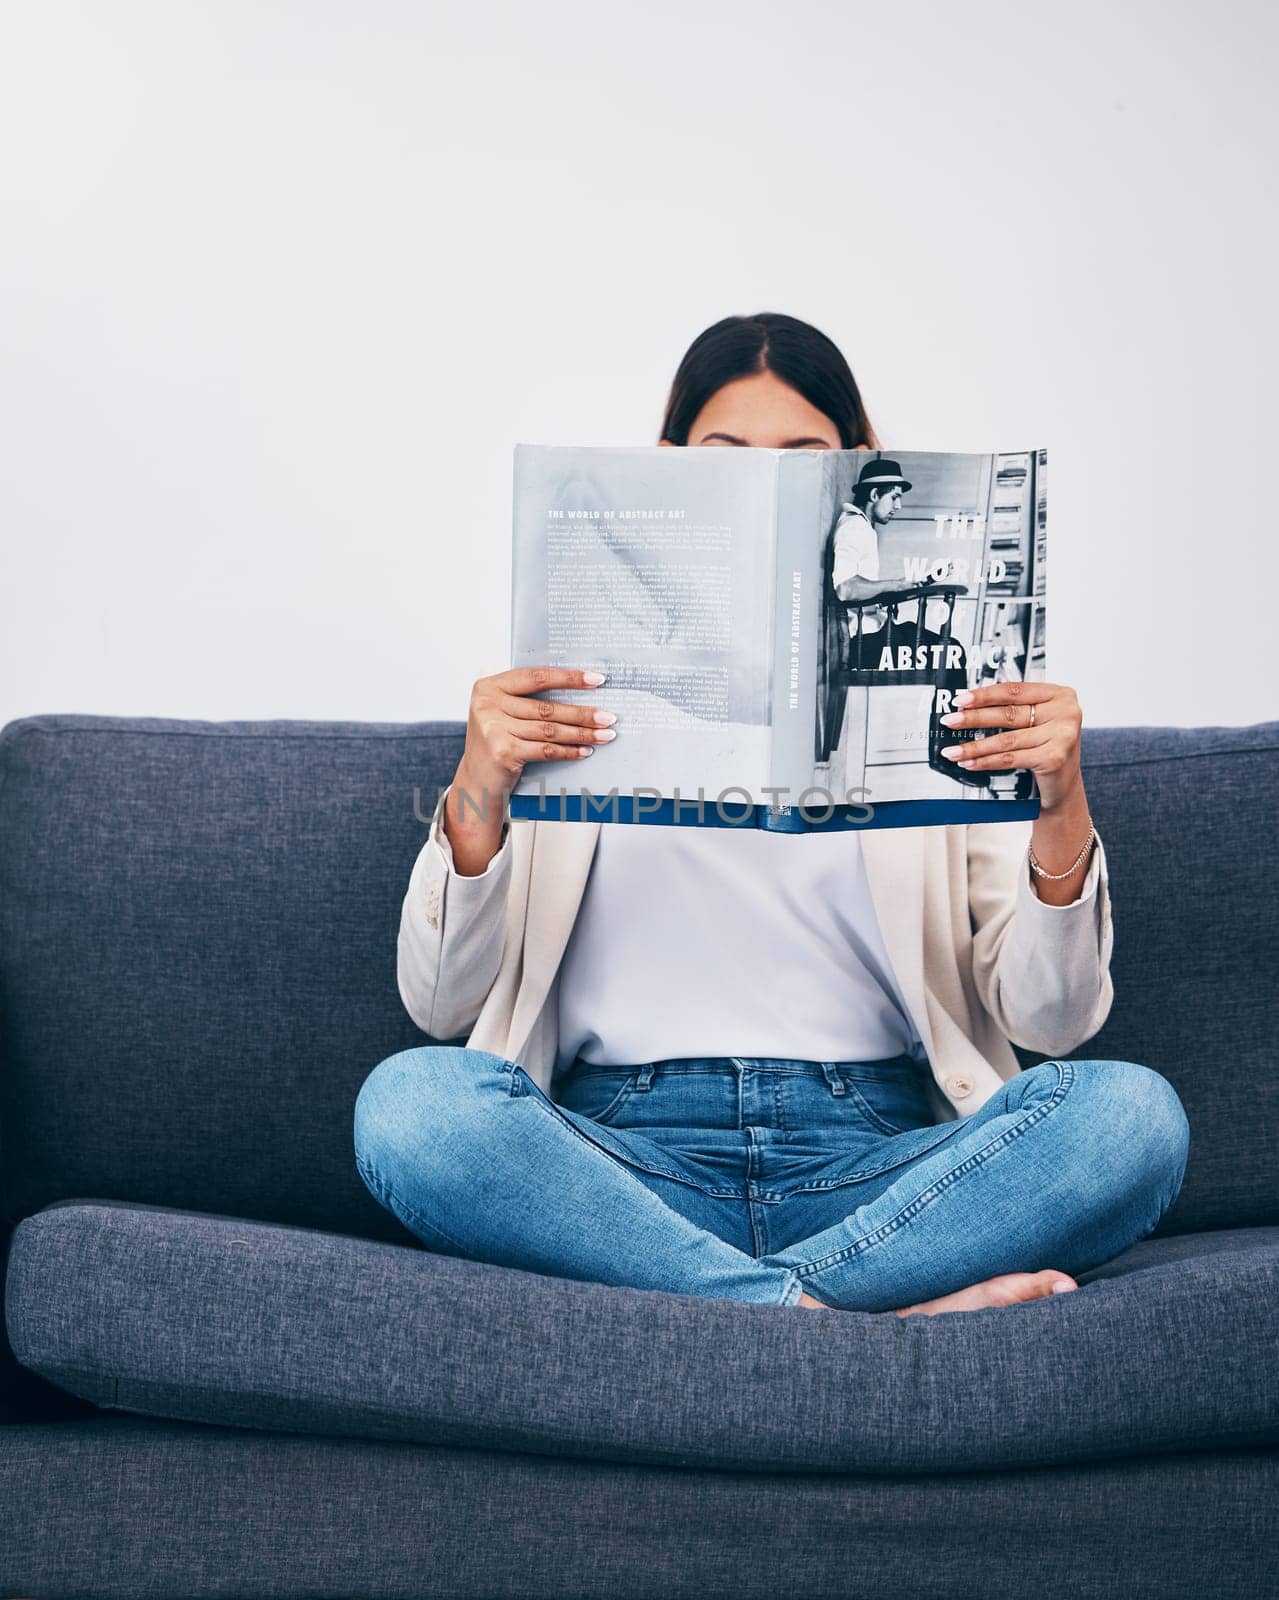 Relax, magazine or woman reading newspaper articles on sofa at home for information or story updates. Press, focus or person relaxing and studying abstract art for knowledge in a publication on couch.